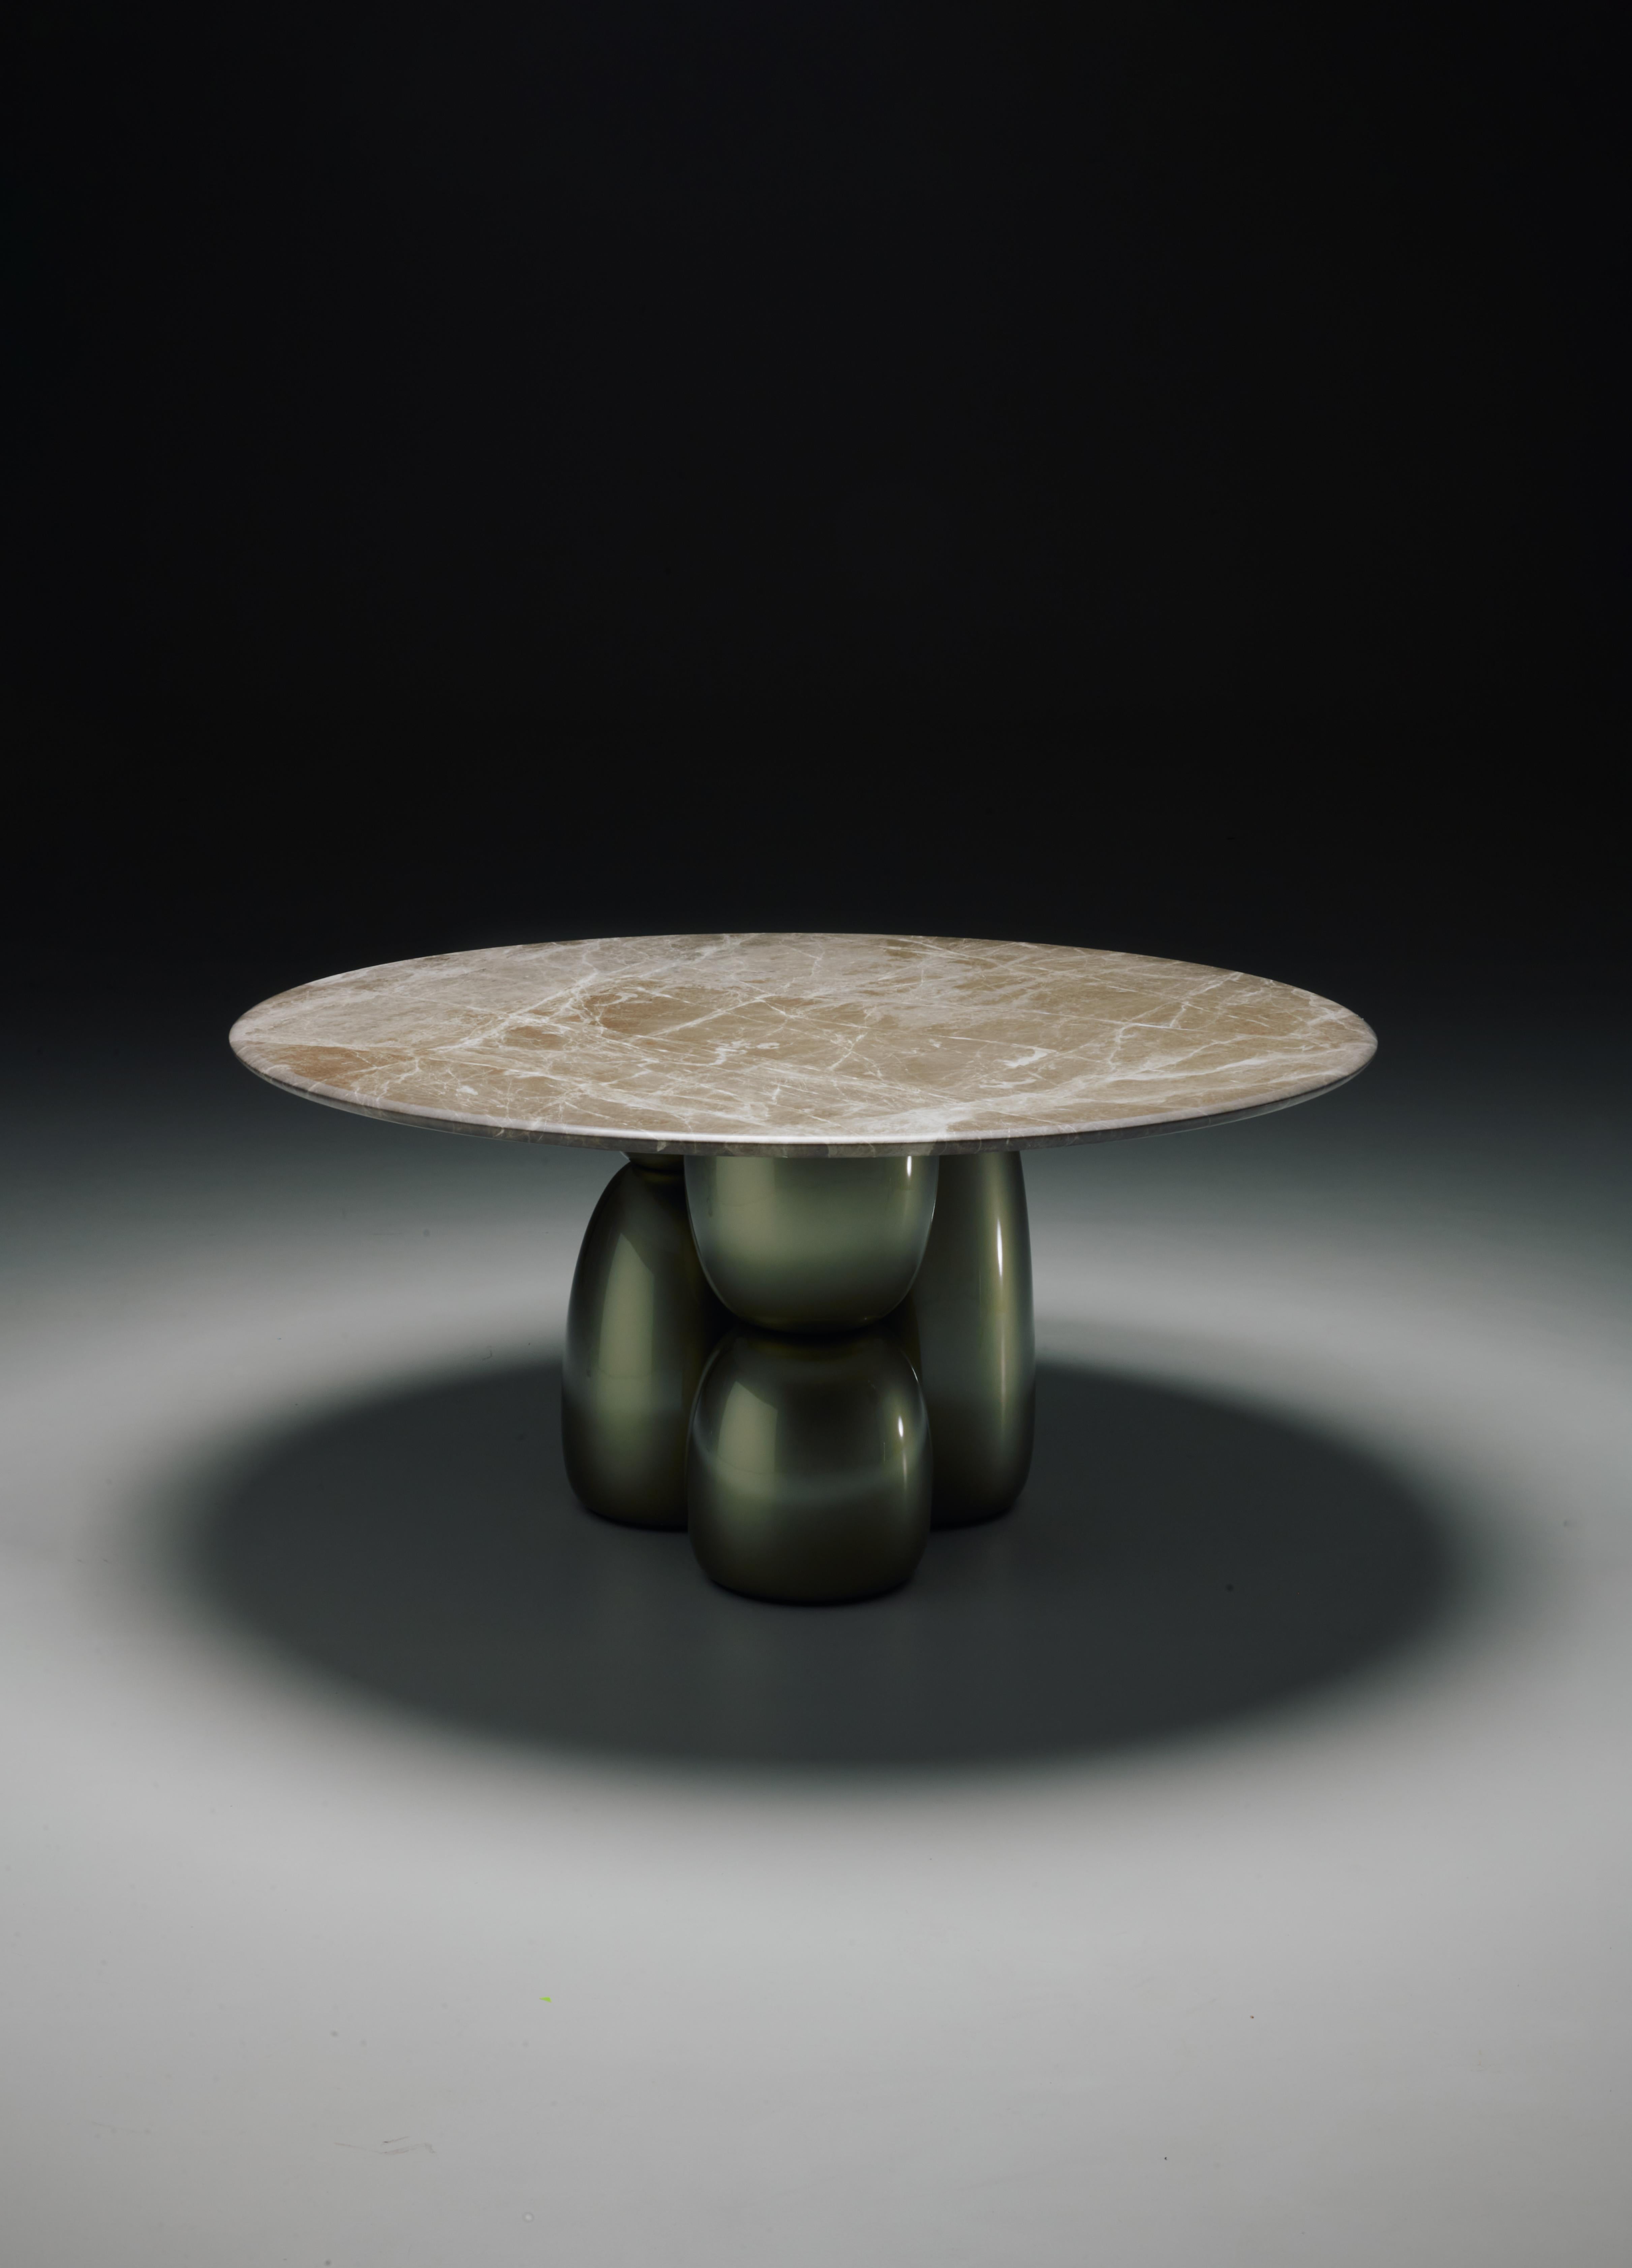 Gem Table - Top in glass smoke
Liquid painted
Design by Sebastian Herkner
The Gem table boasts an interactive design. Its configuration is reminiscent of the stacked towers made of round pebbles on beaches. It is playful and mystical. The table